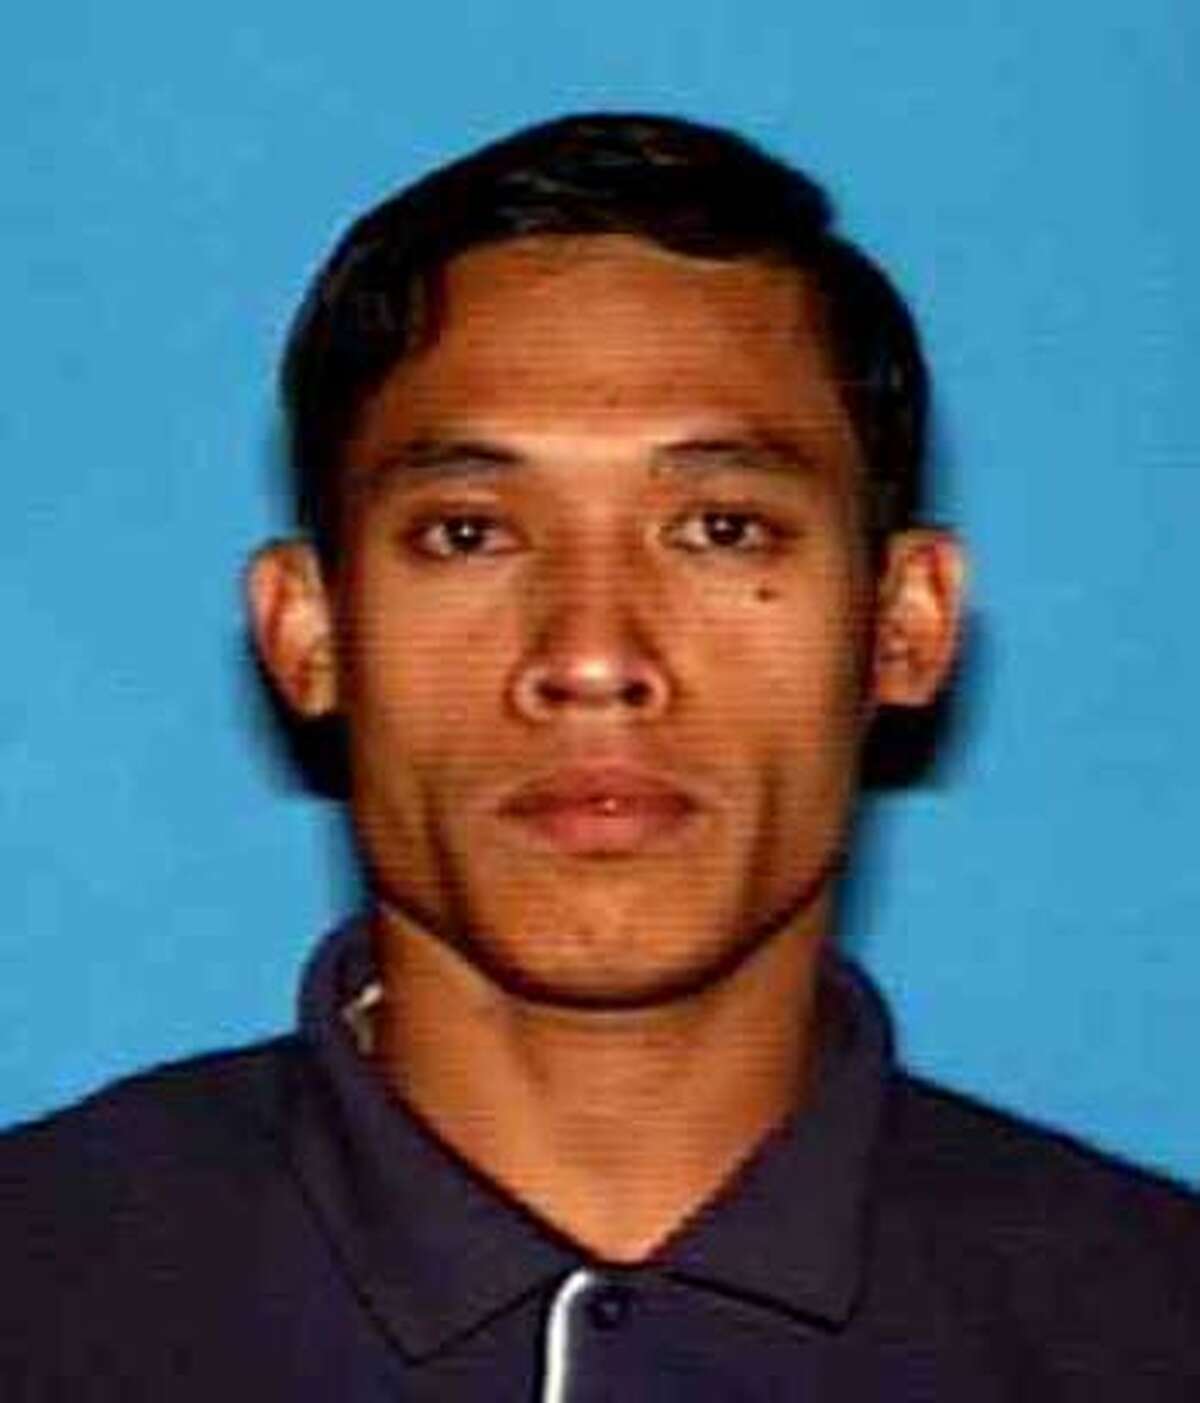 pizzaslay28_ph.JPG Undated handout picture of Thanh Thach, 38, a father of two who lived in Richmond with his wife, was shot about 9 p.m. Monday as he was trying to deliver a Pizza Hut pie on South 45th Street, authorities said. Richmond Police Department / MANDATORY CREDIT FOR PHOTOG AND SAN FRANCISCO CHRONICLE/NO SALES-MAGS OUT